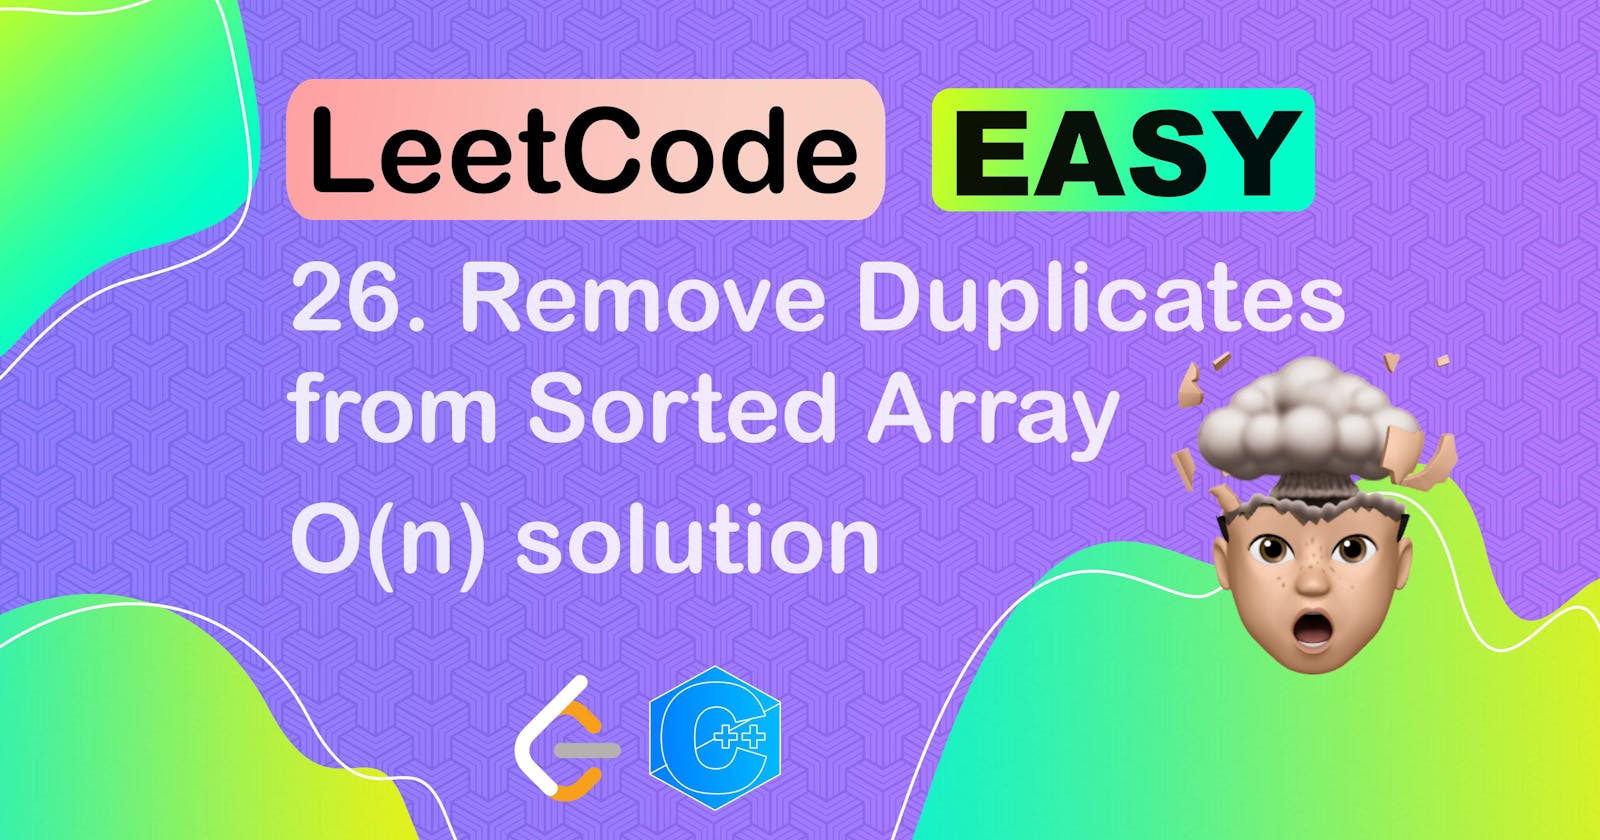 Remove Duplicates from Sorted Array - LC26